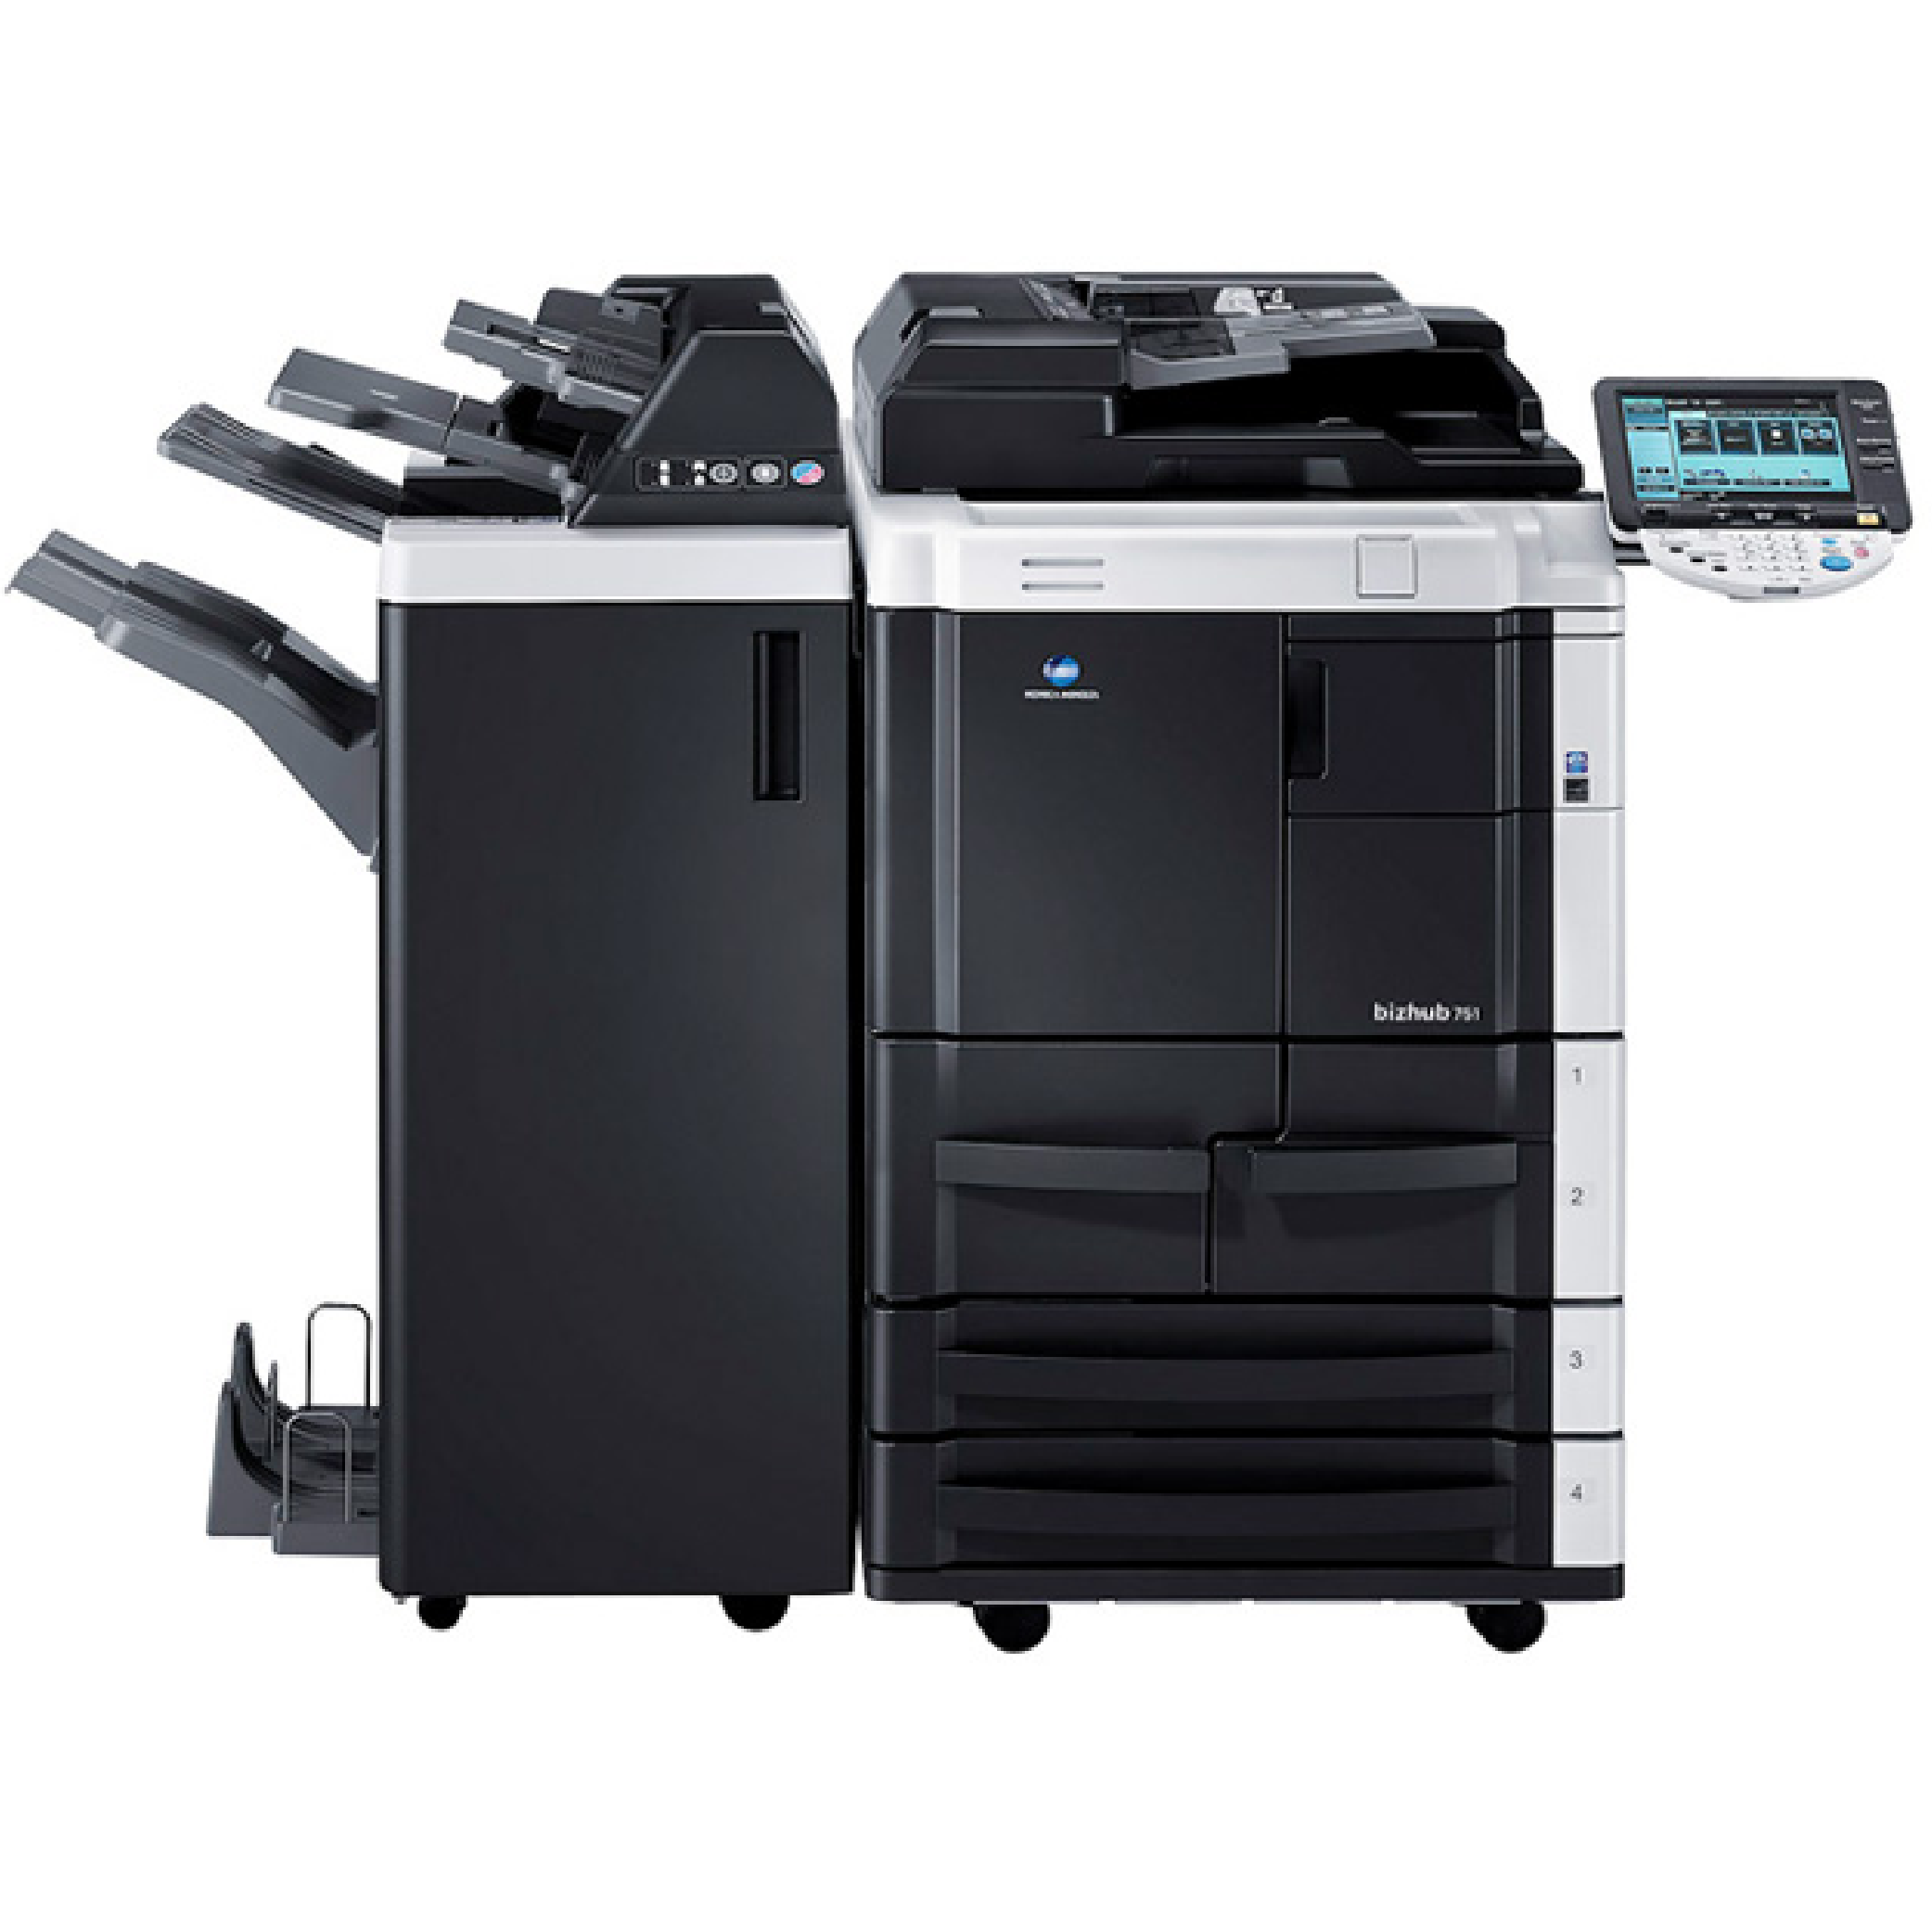 Featured image of post Konica Minolta Photocopier Price In Pakistan Get latest details on xerox photocopier machine xerox colored photostat machine prices models wholesale prices in chennai tamil nadu xerox photocopier